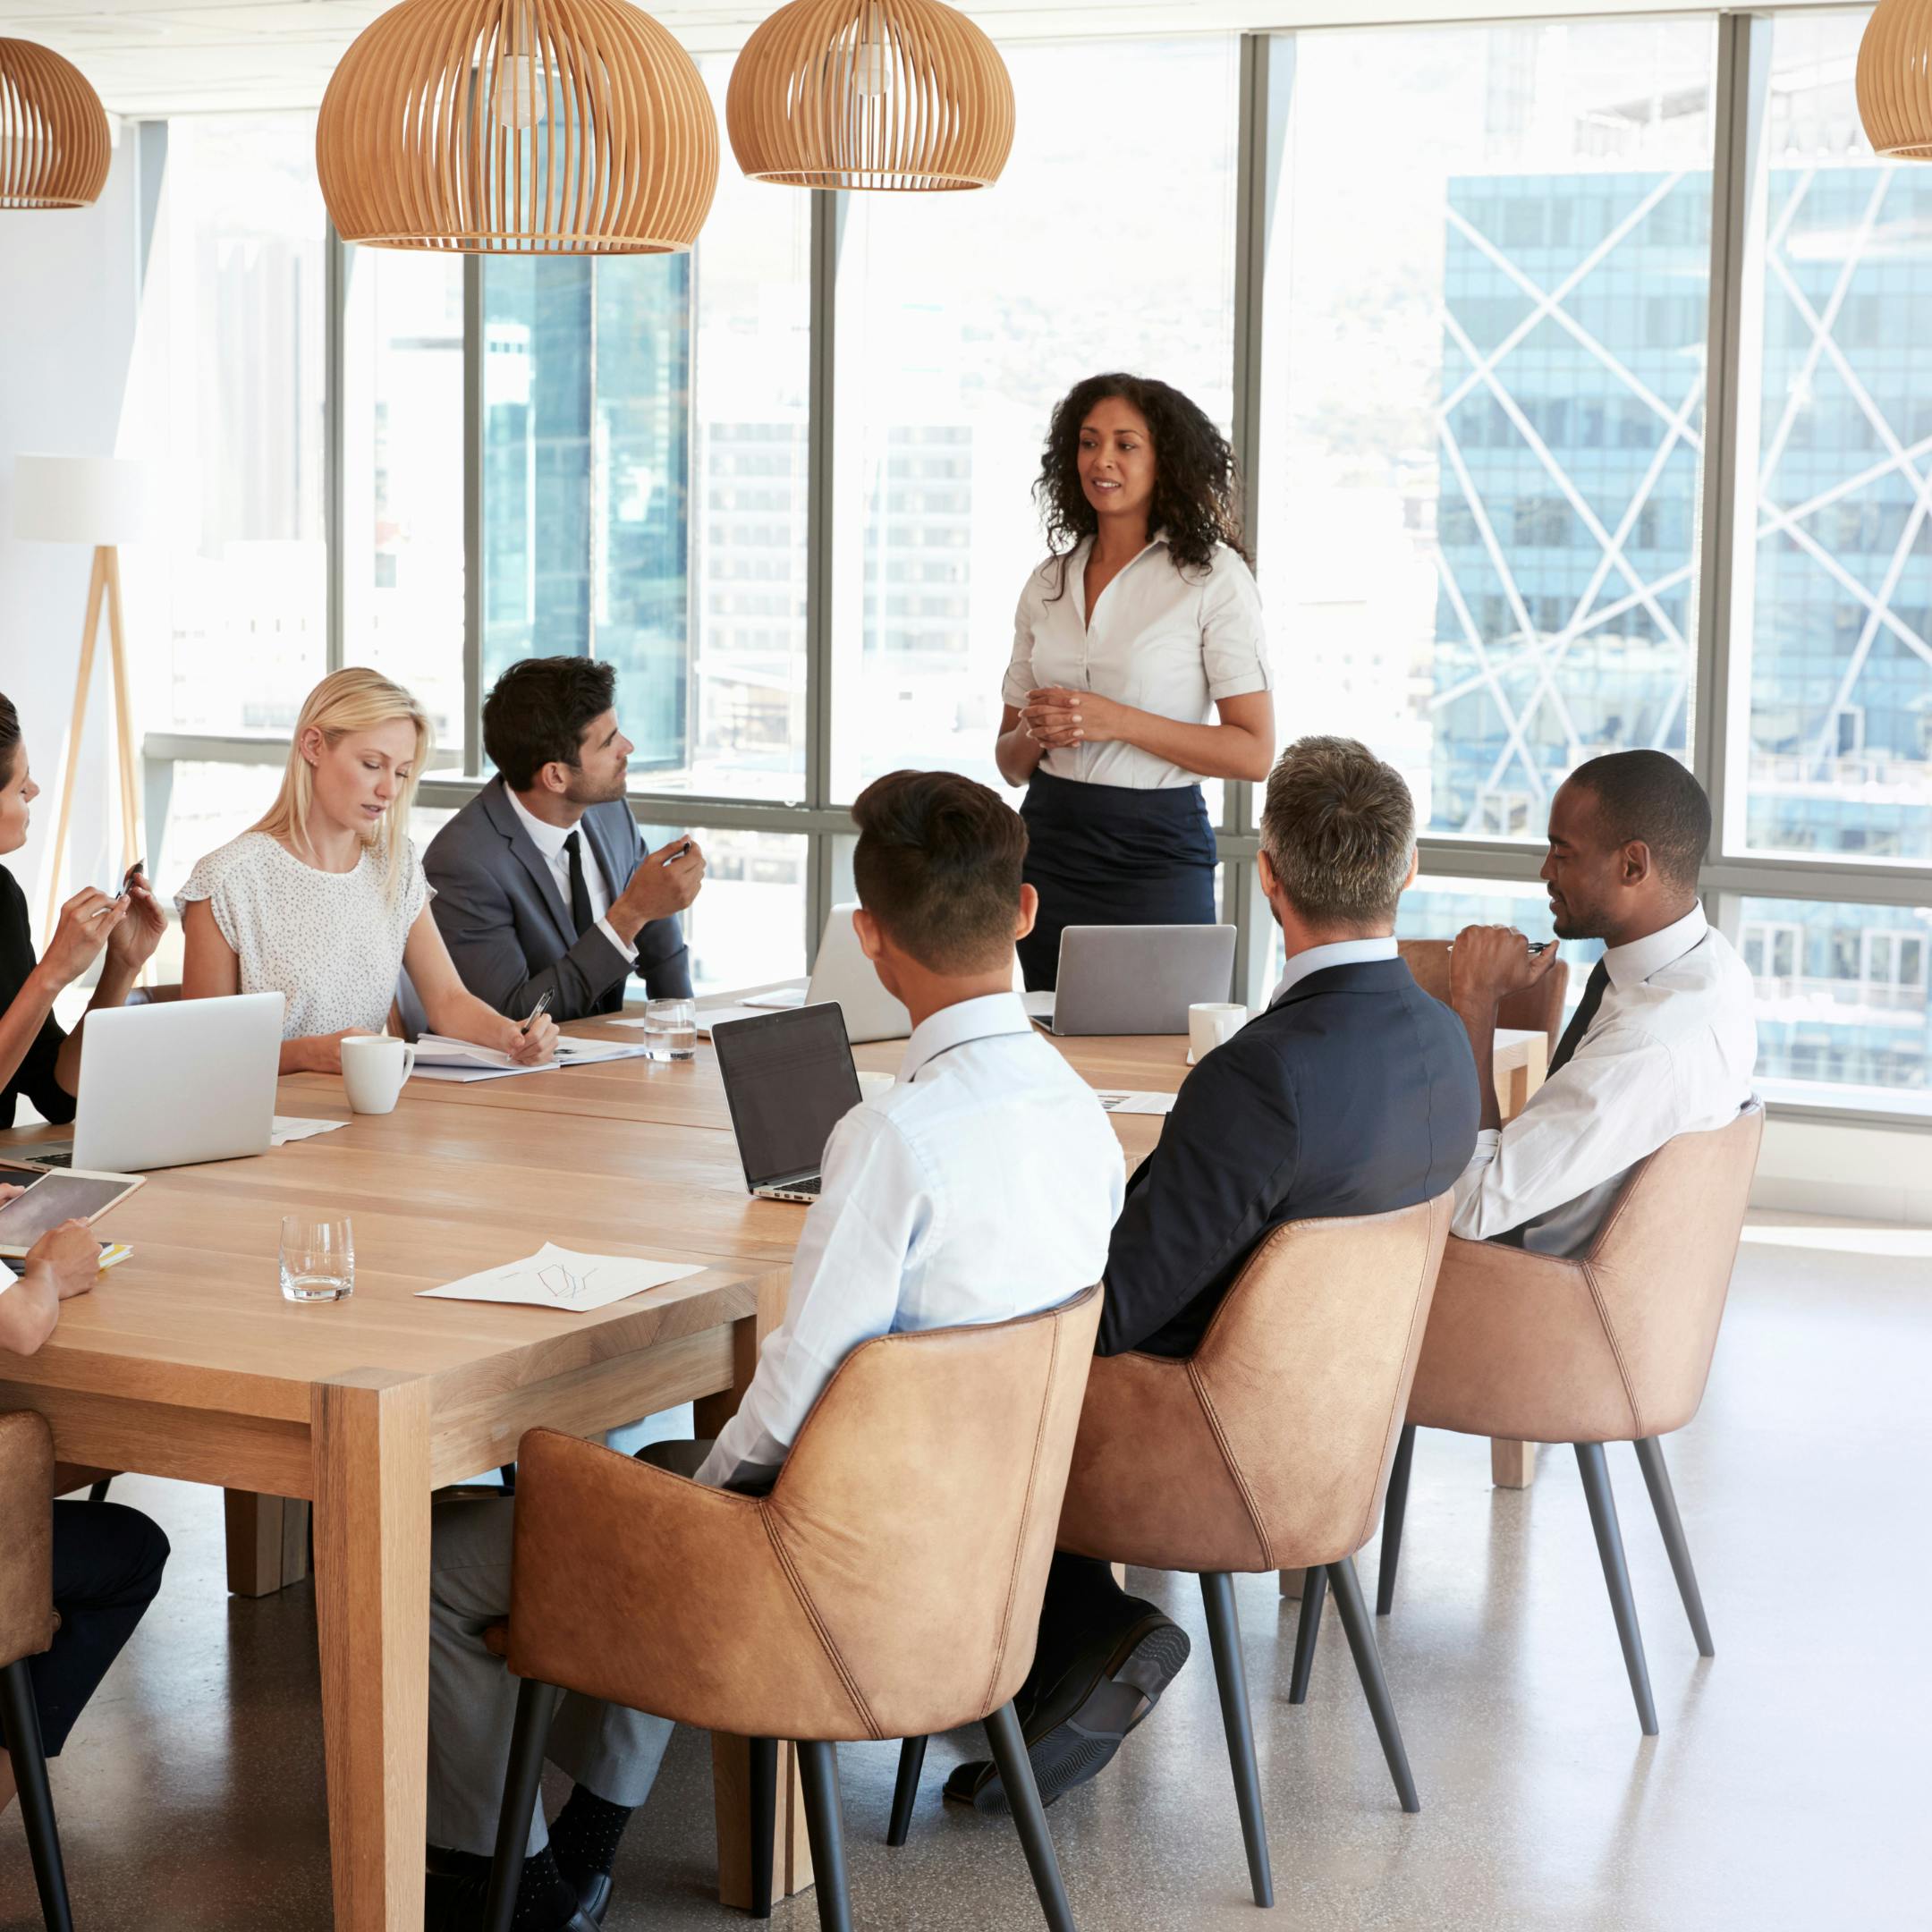 Professional men and women engaged in a business meeting around a conference table